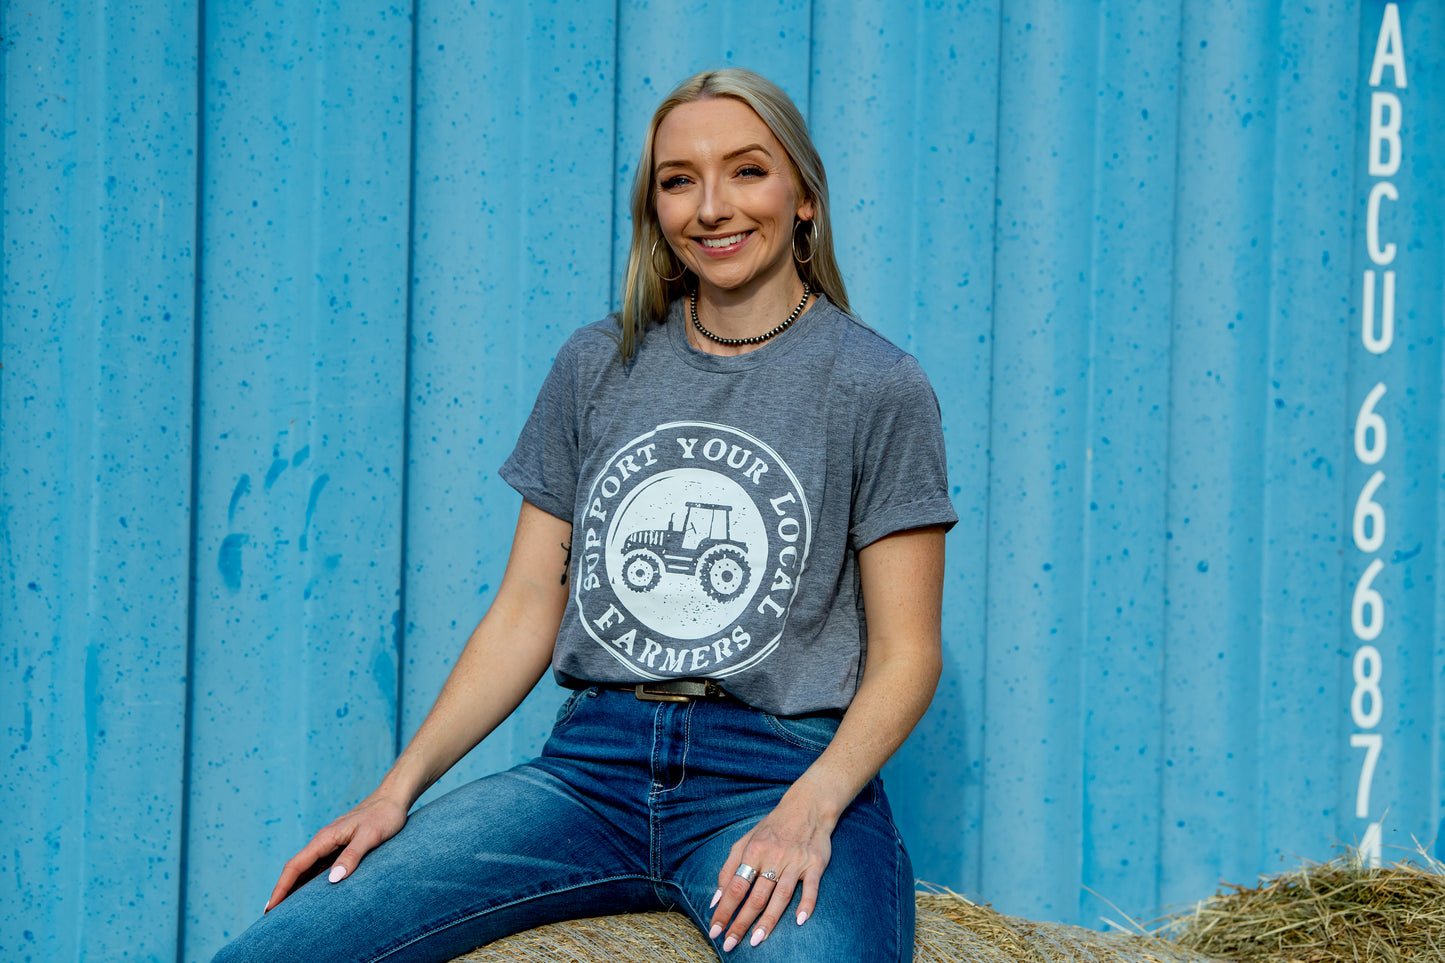 Support your Farmer tee